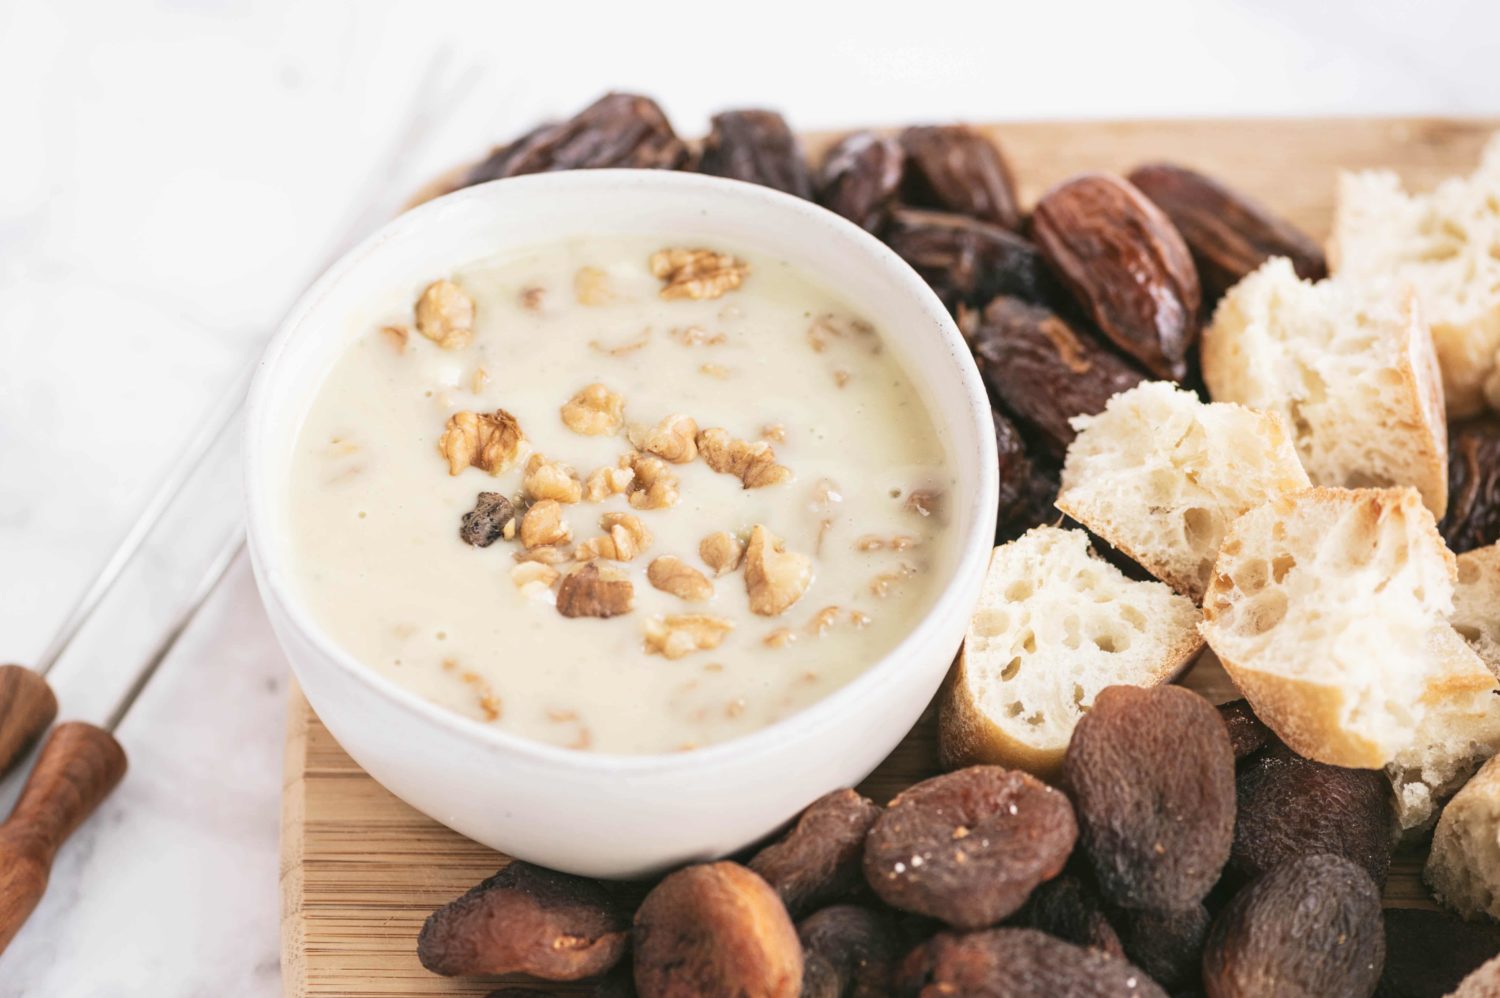 a bowl of light colored fondue with dates and pecans sprinkled on and around it